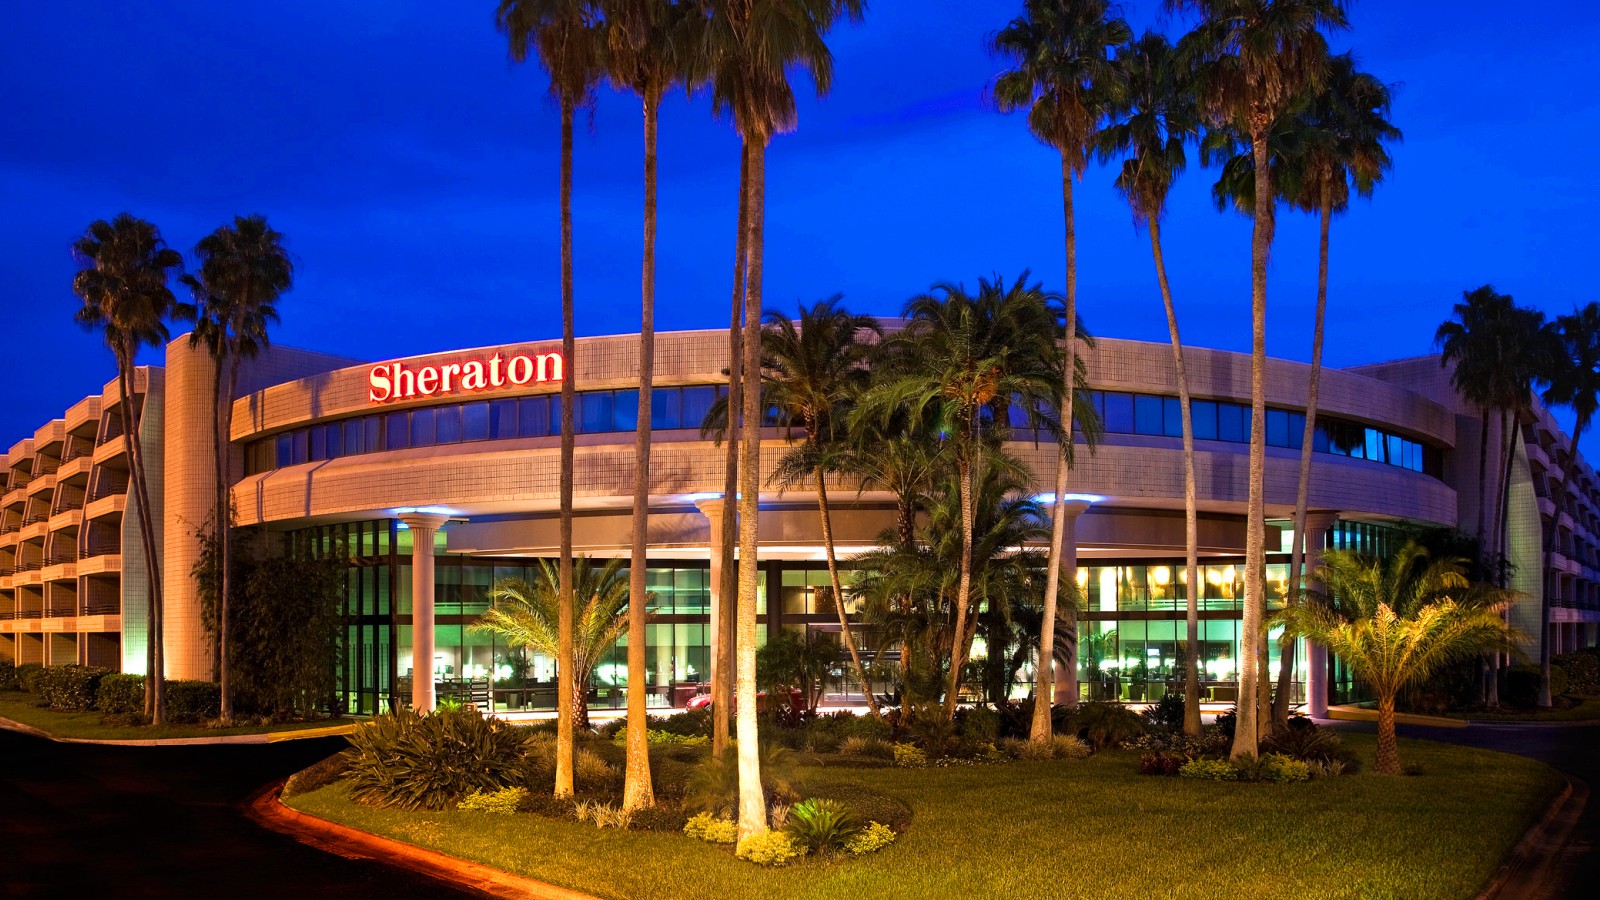 The 266-room Sheraton Tampa East Hotel located in Orlando Fla was sold to an entity related to Varde Partners Waramaug Ho